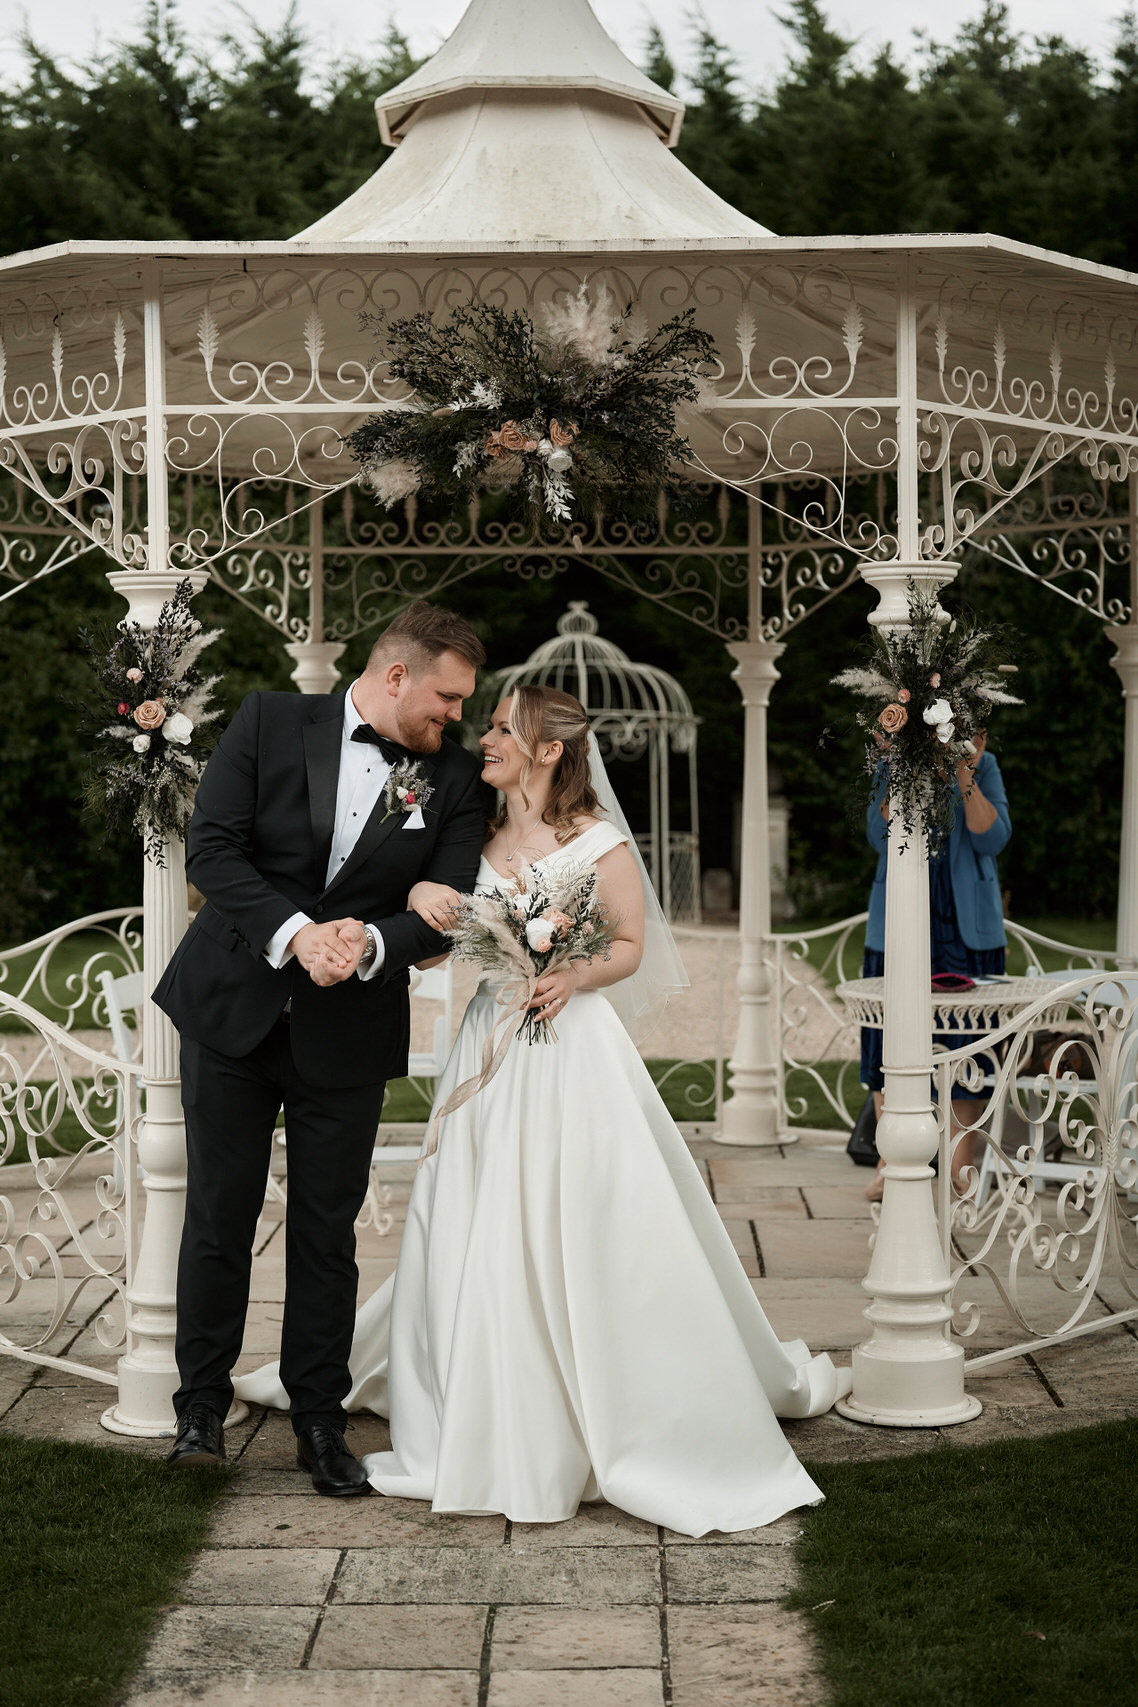 A couple getting married standing under a small outdoor structure.